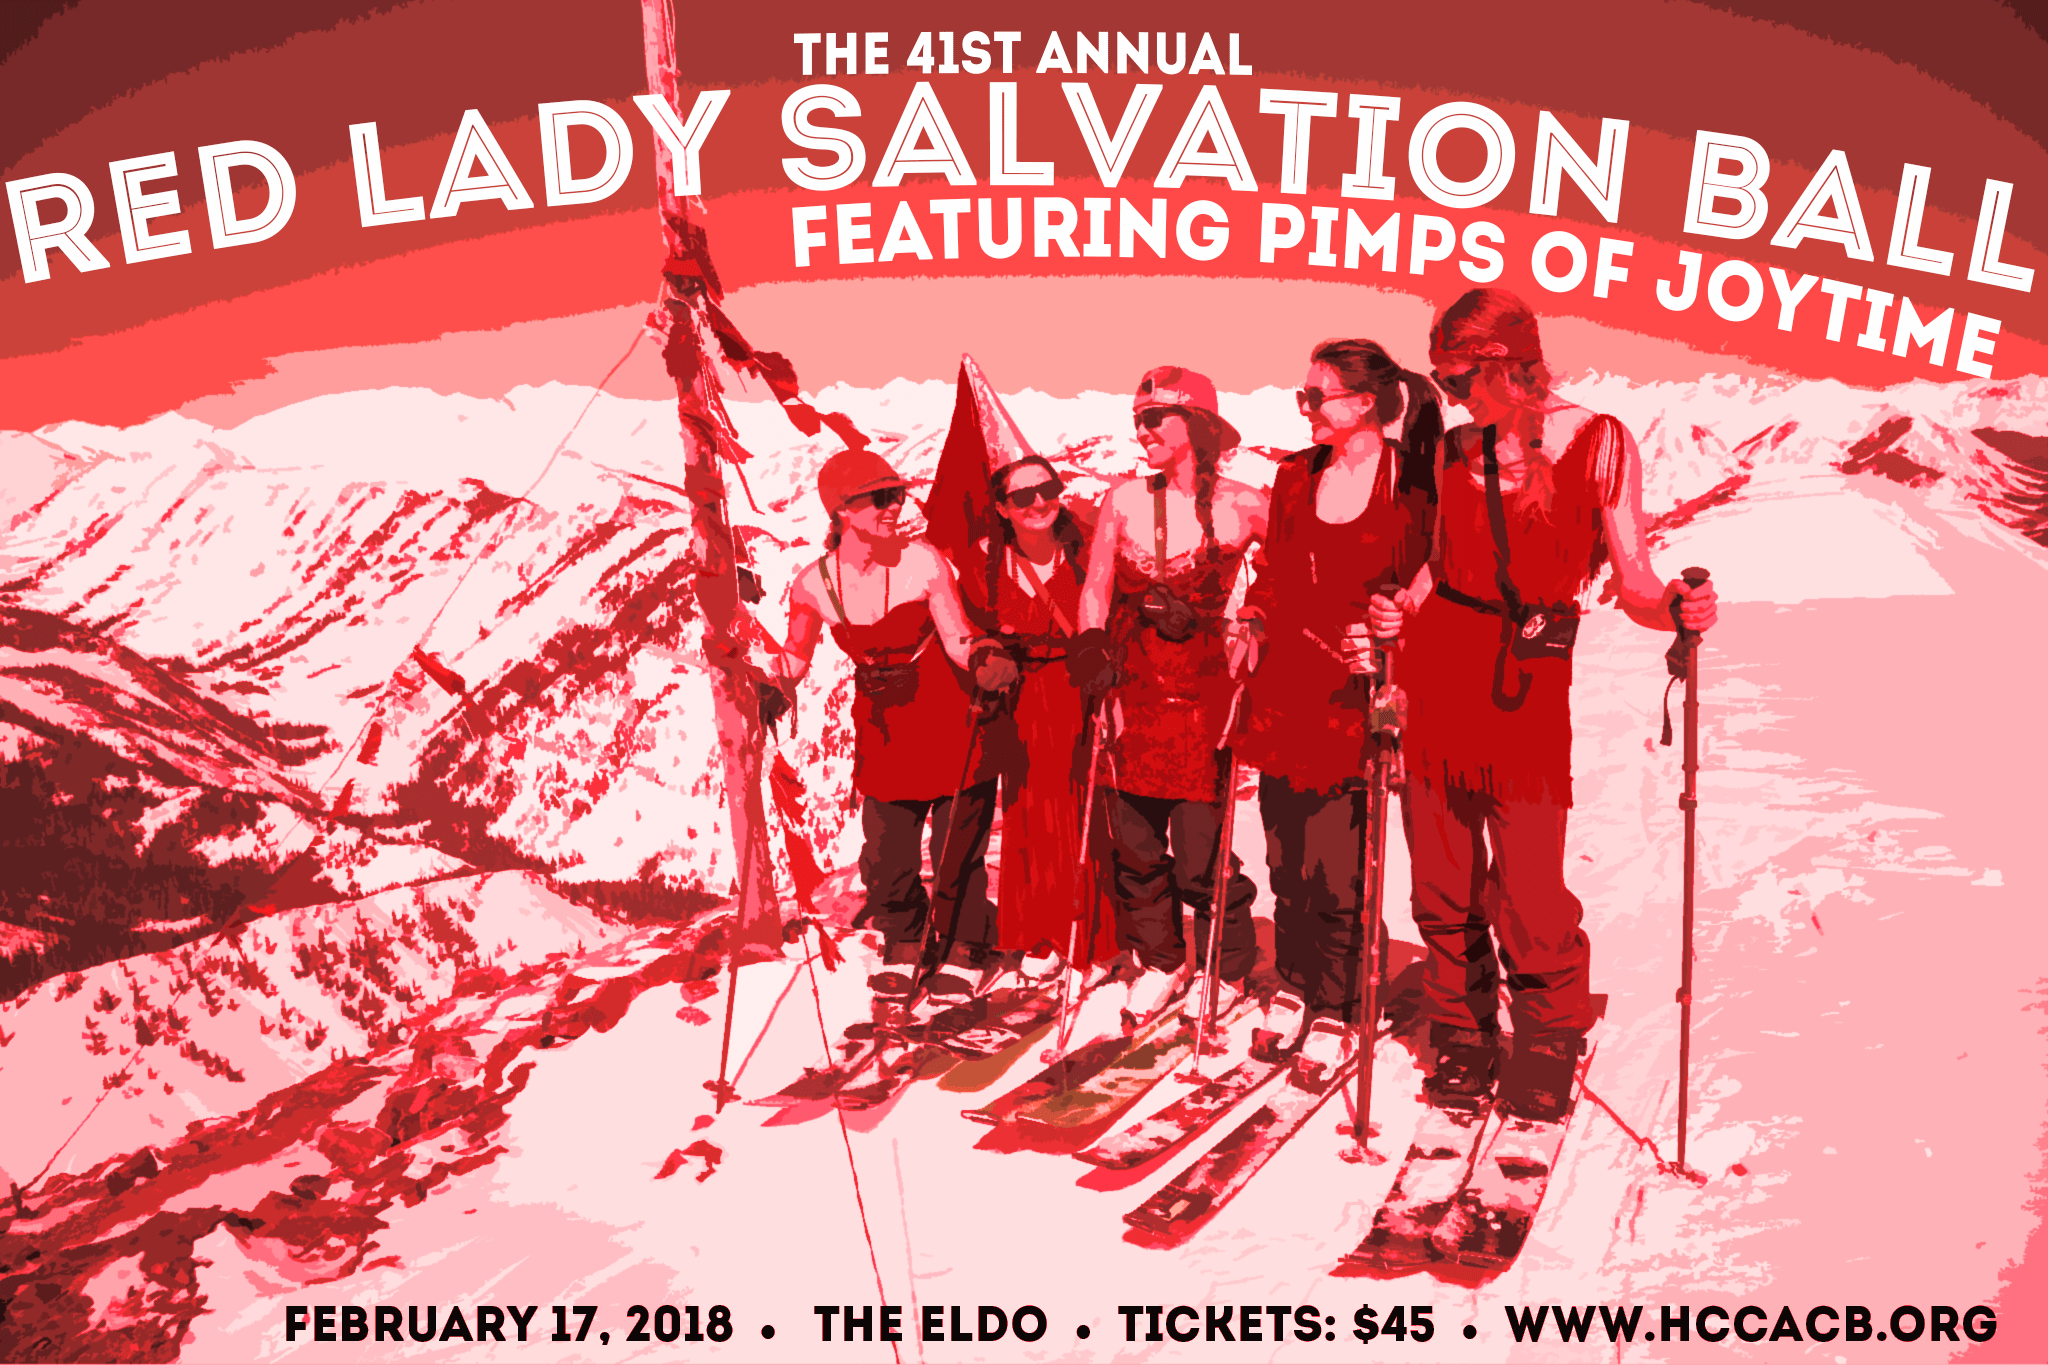 41st Annual Red Lady Salvation Ball featuring Pimps of Joytime ...